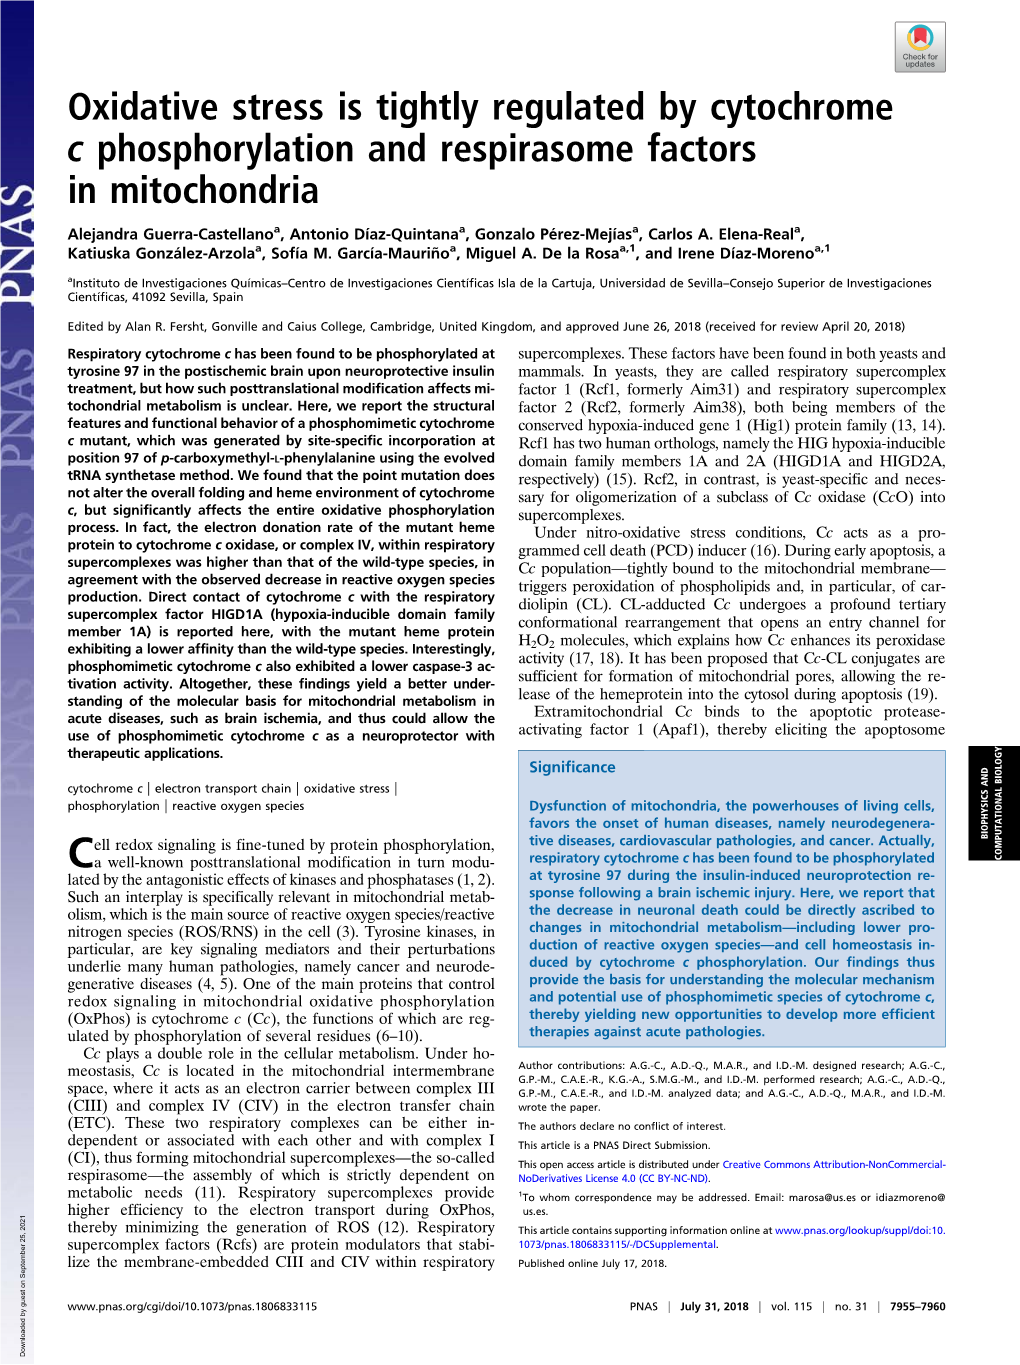 Oxidative Stress Is Tightly Regulated by Cytochrome C Phosphorylation and Respirasome Factors in Mitochondria